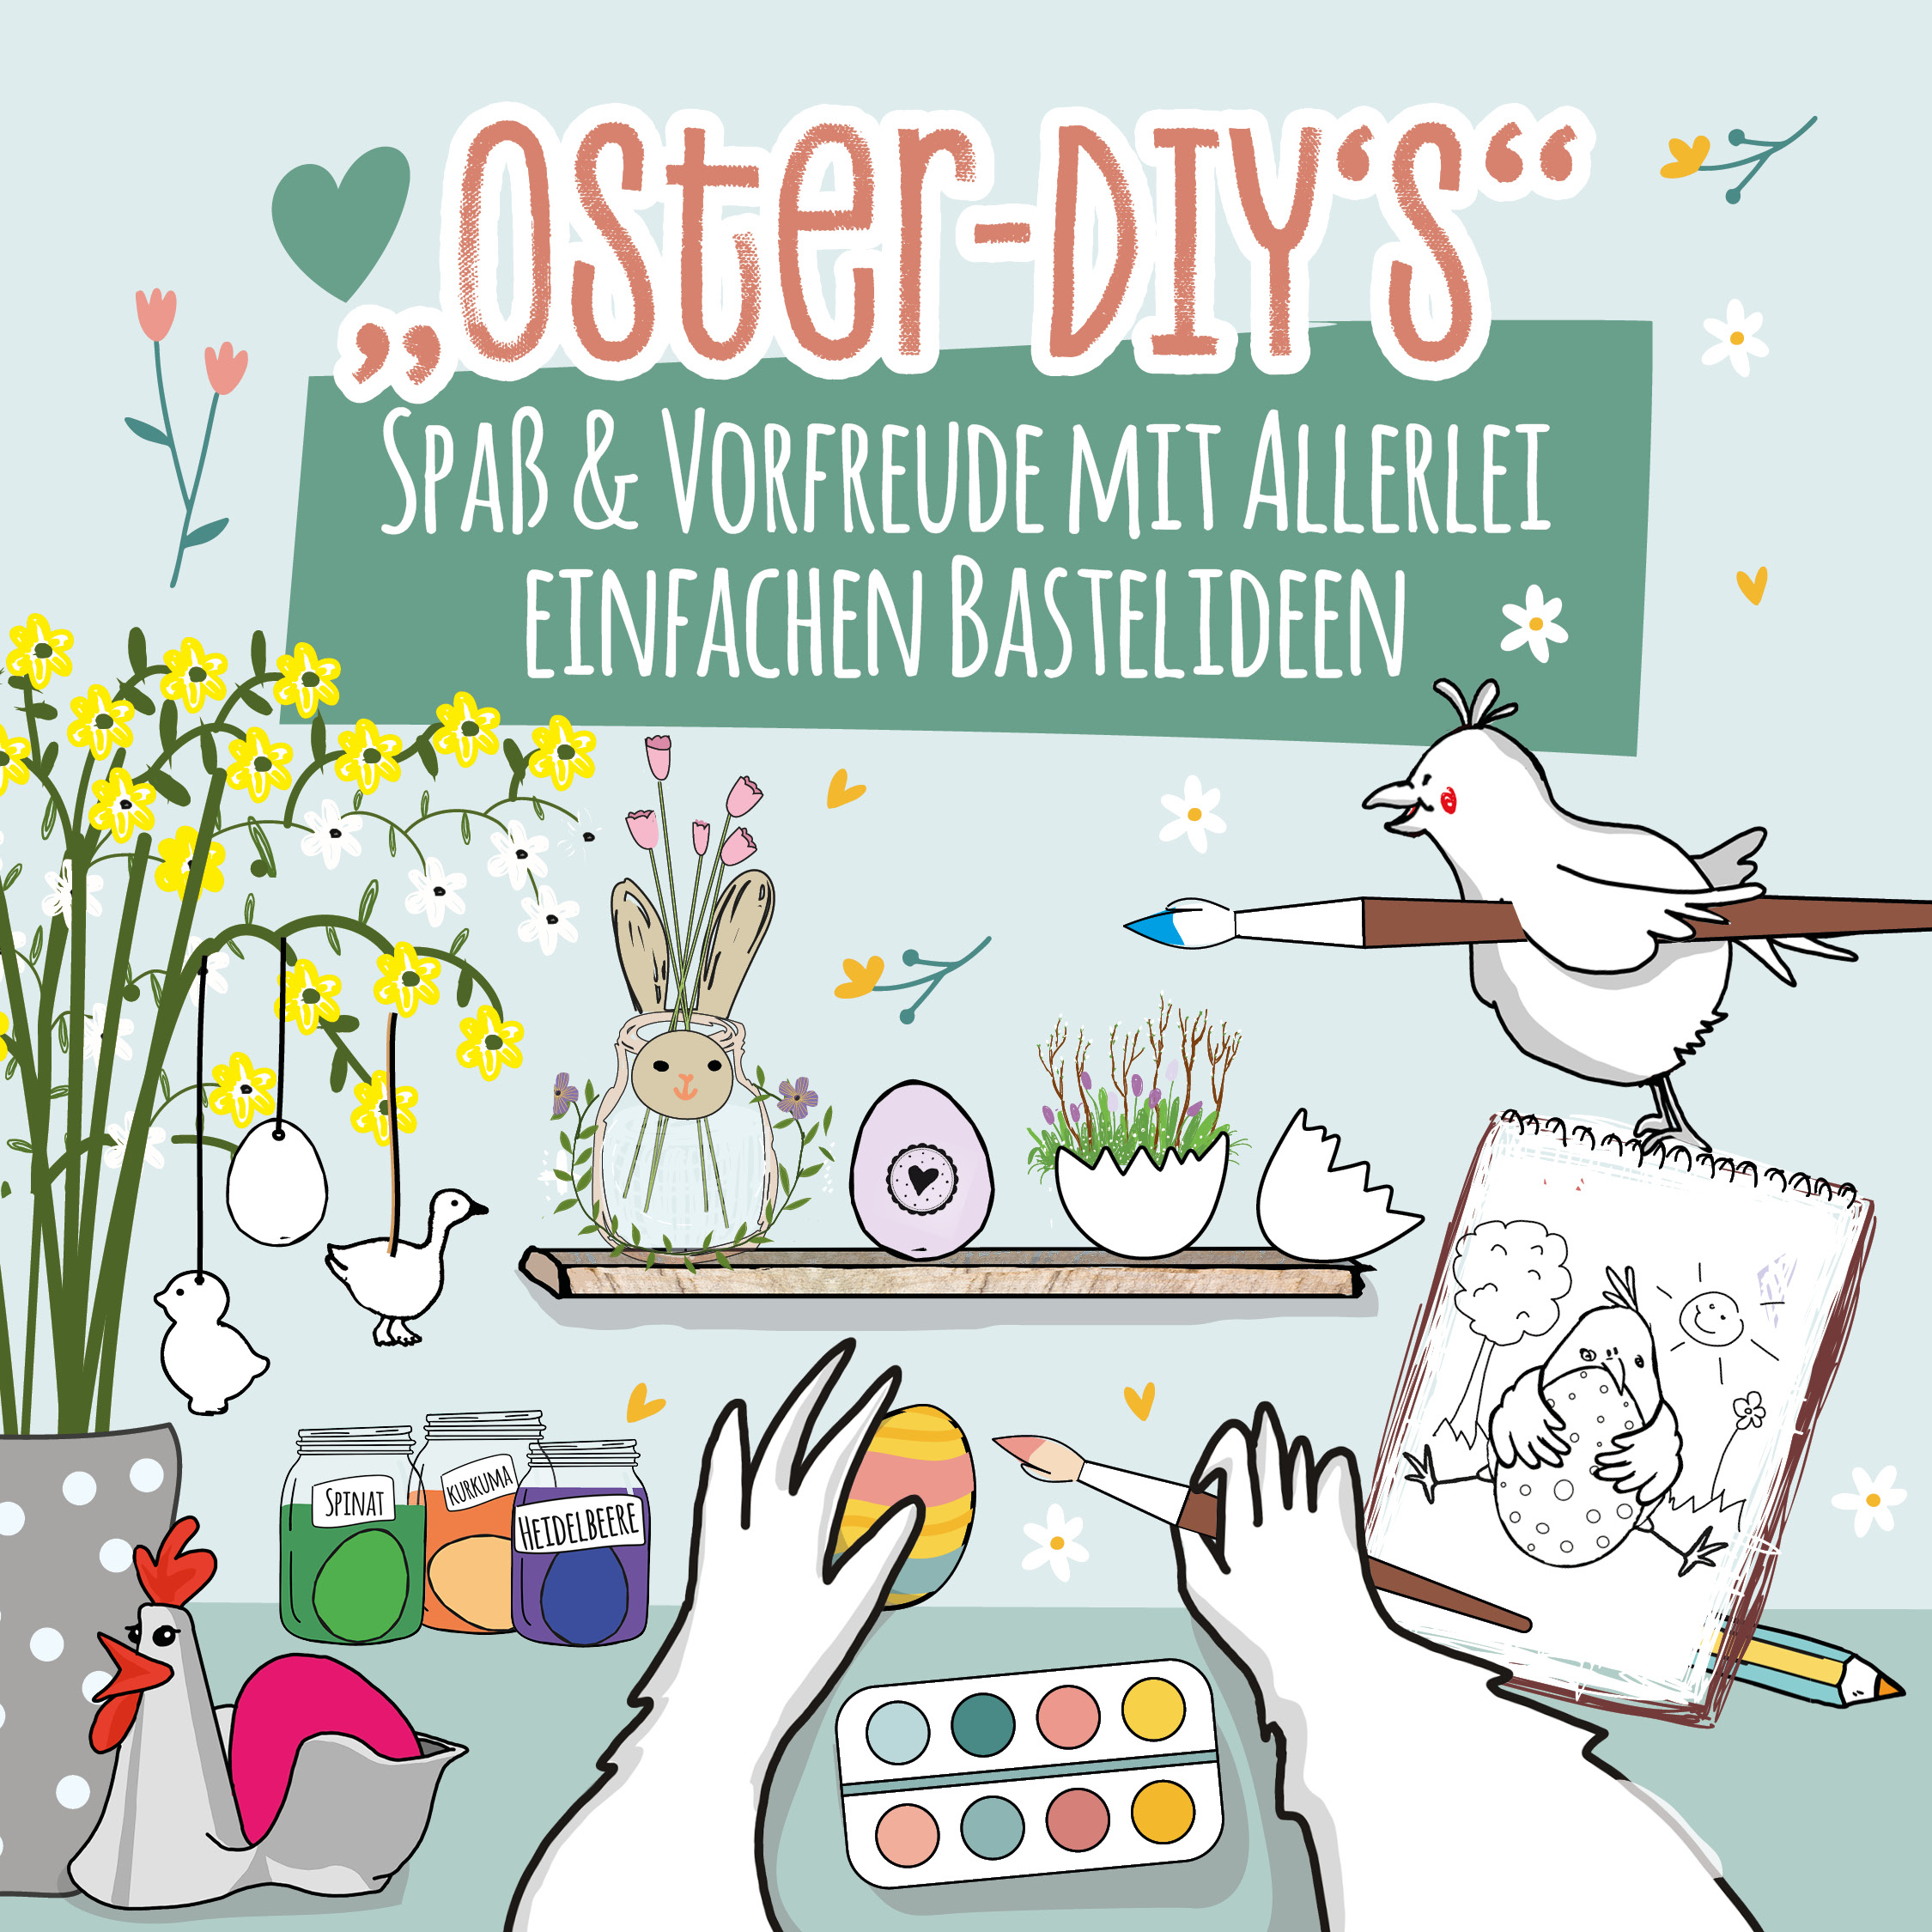 Unsere Oster-DIY Charts